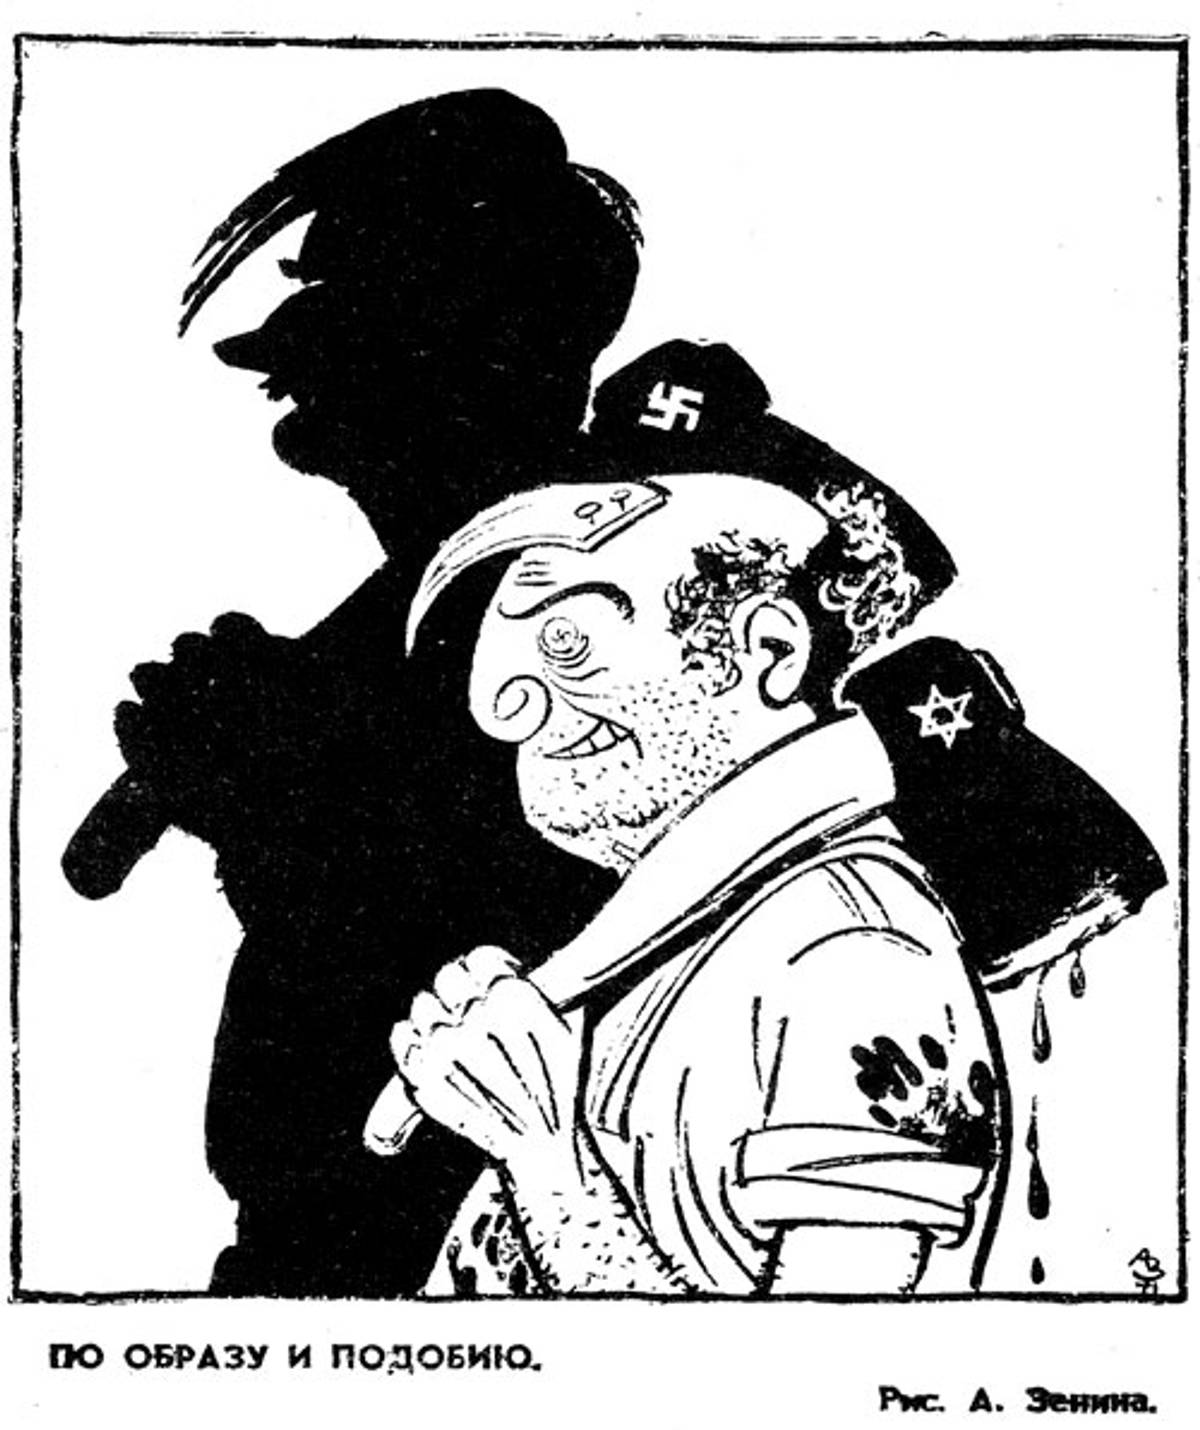 Fig. 13: ‘In His image and likeness,’ A. Zenin, Sovietskaya Moldavia, Jan. 22, 1972. (From The Israeli-Arab Conflict in Soviet Caricatures, 1967–1973 by Yeshayahu Nir, Tcherikover Publishers, 1976)